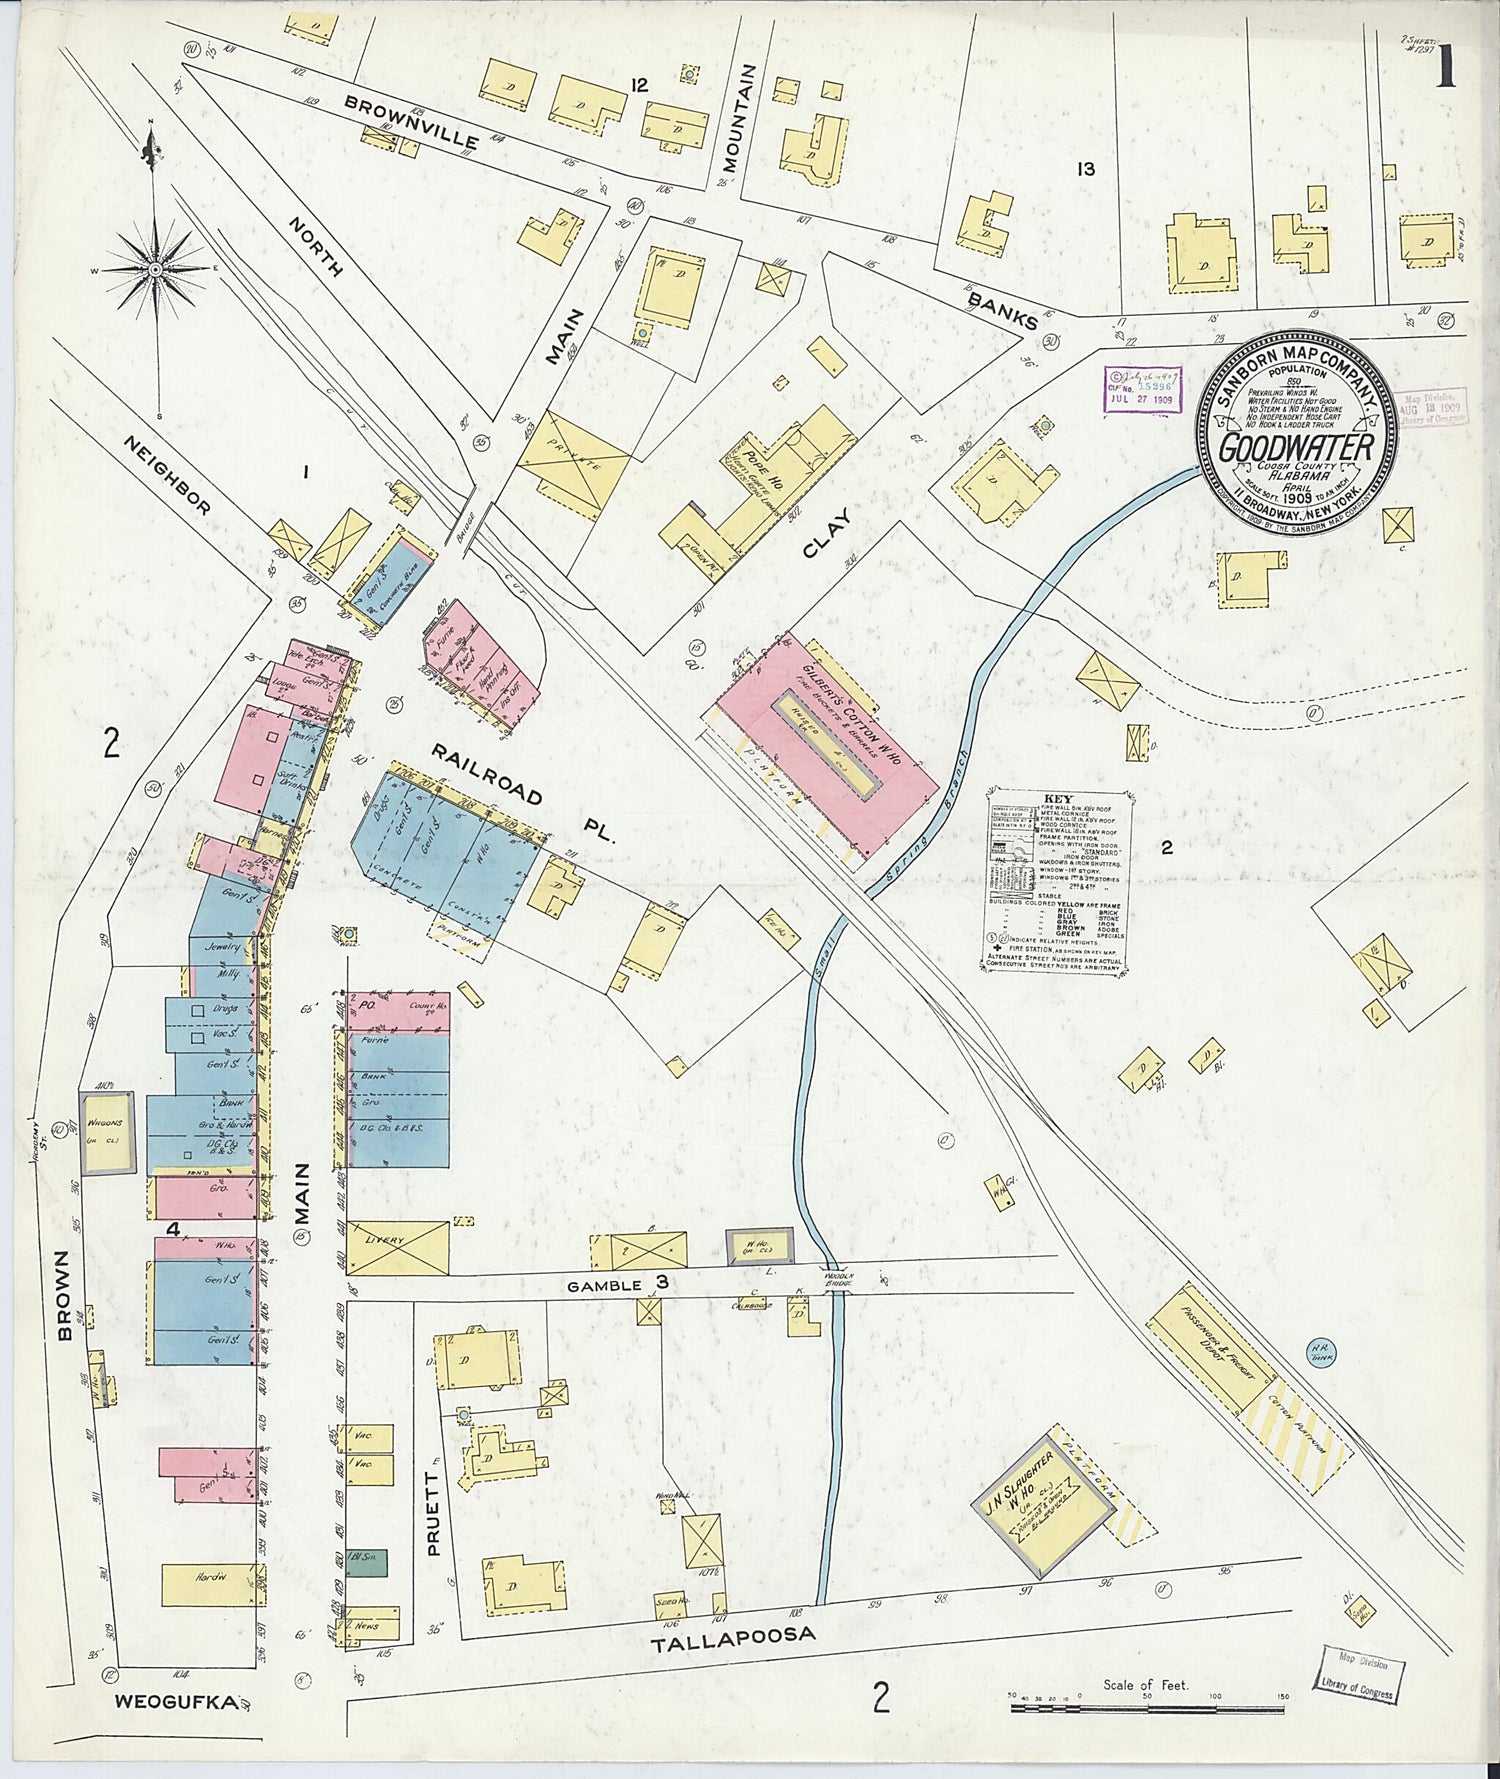 This old map of Goodwater, Coosa County, Alabama was created by Sanborn Map Company in 1909